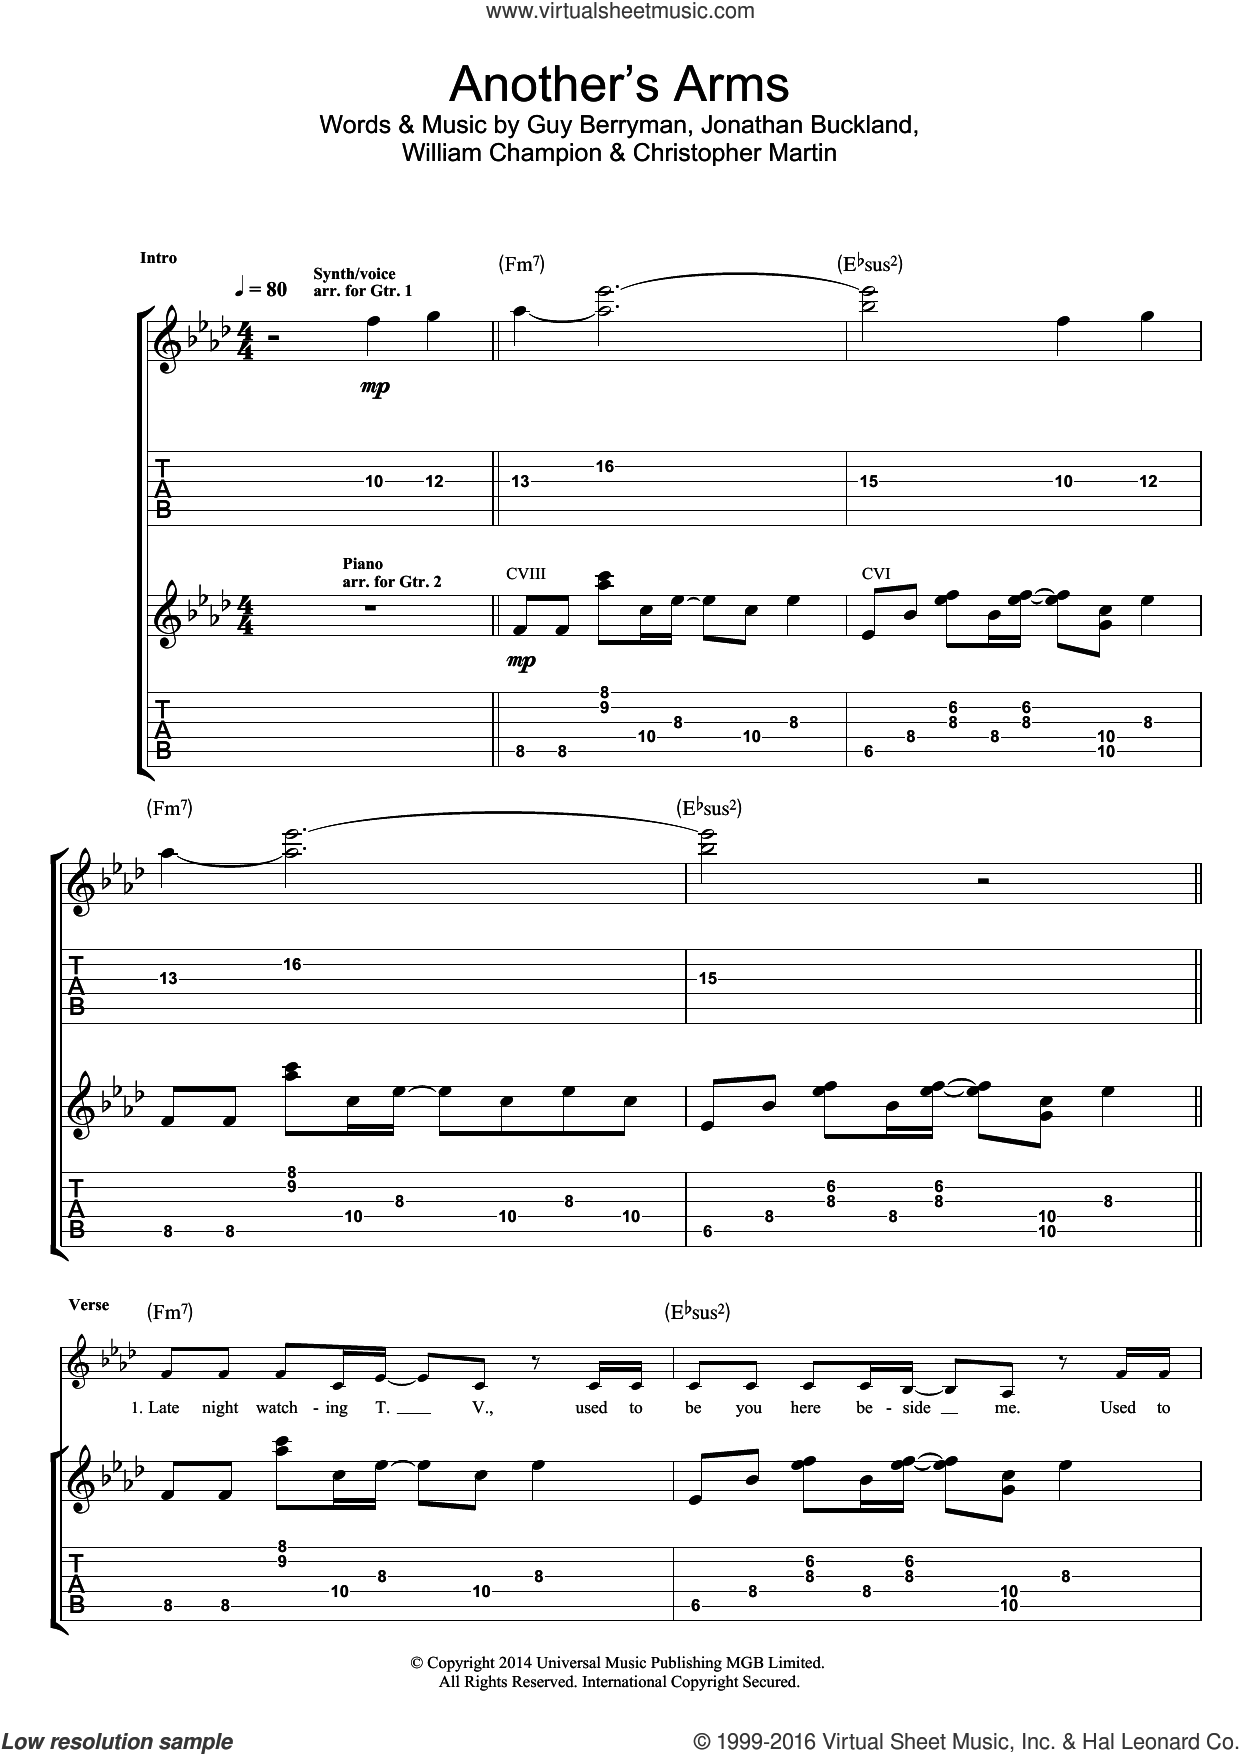 Coldplay - Another's Arms sheet music for guitar (tablature)